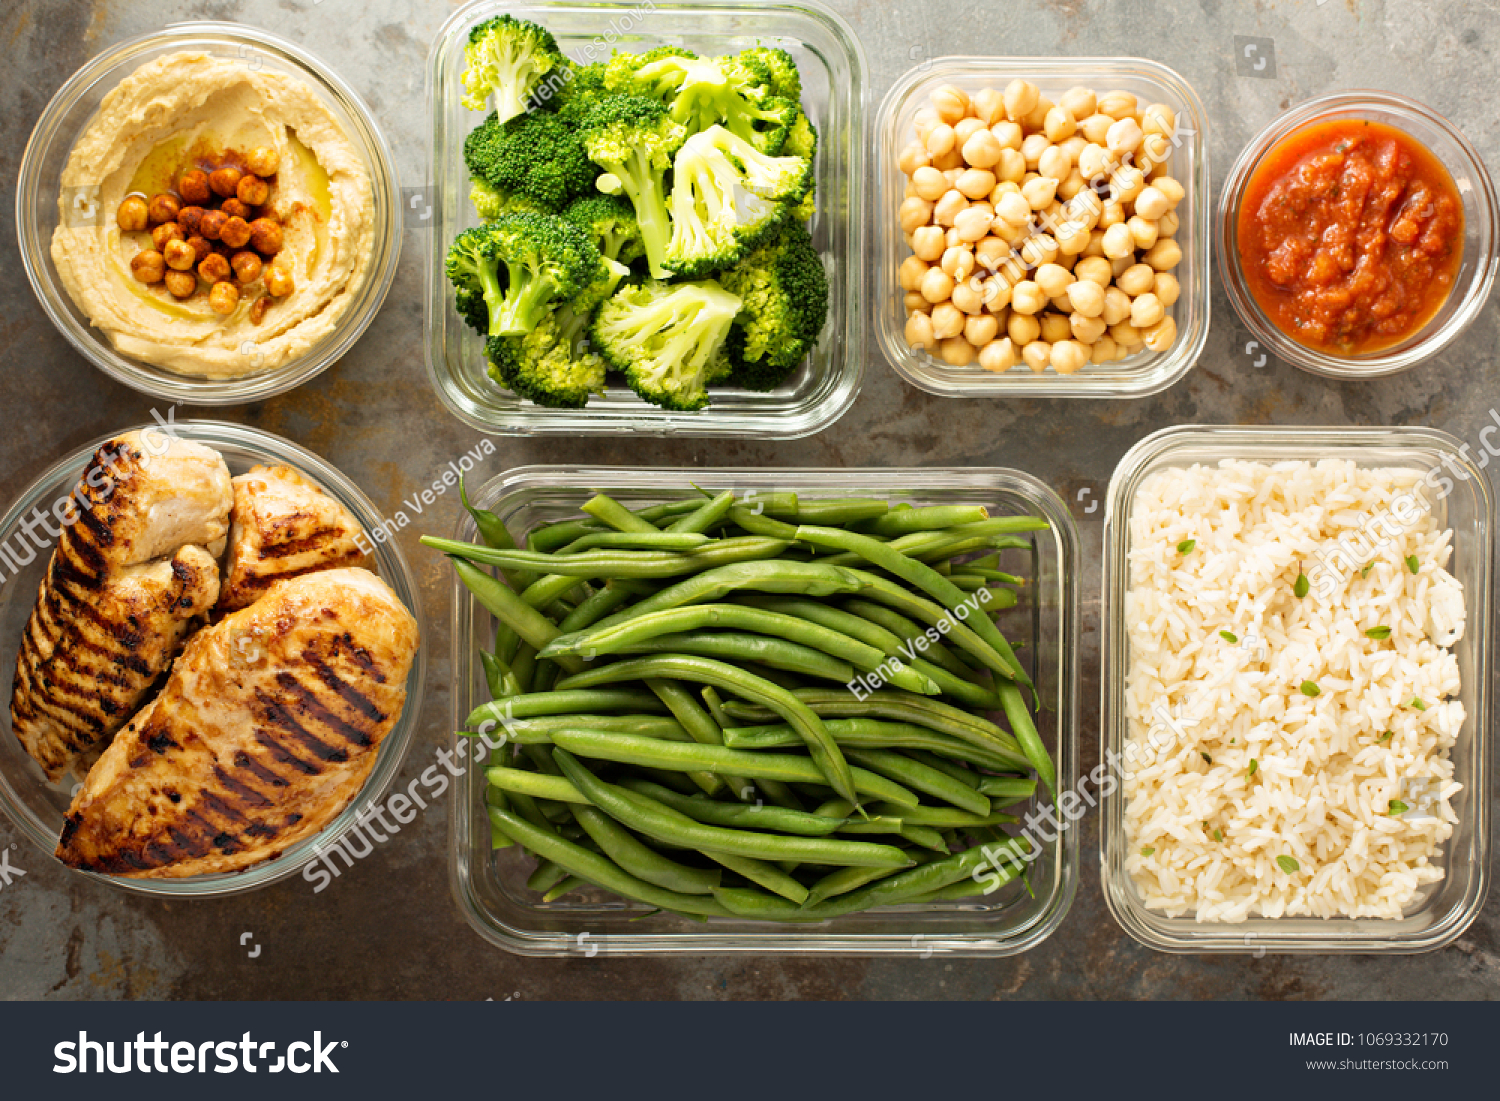 Grilled chicken meal prep with cooked rice and vegetables #1069332170